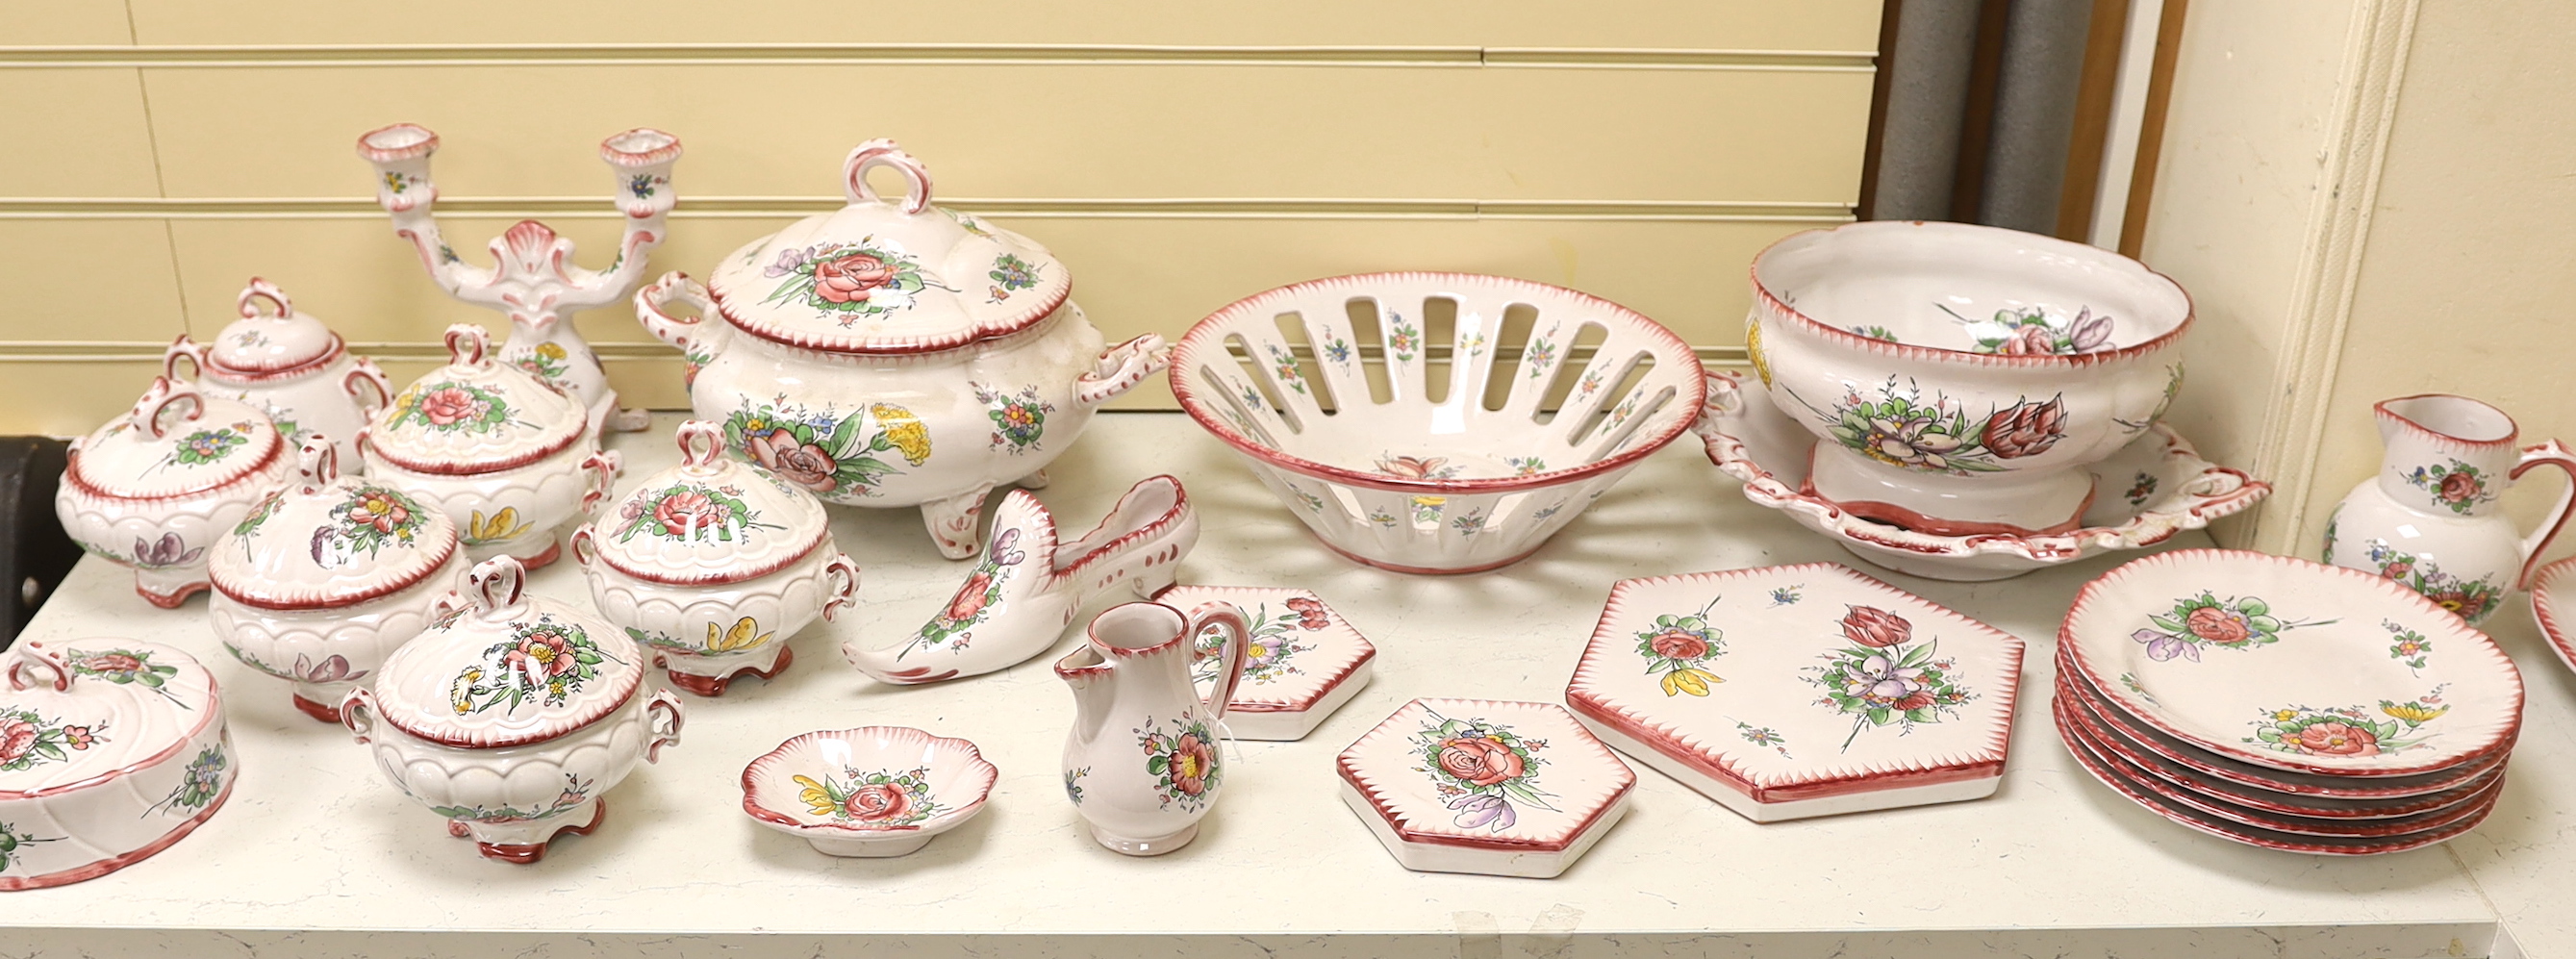 Le Renoleau Faiencerie D'Art, Angouleme, French faience tableware with floral decoration, including lidded serving pots, tureens, jugs, serving dishes, coasters, plates, candle stands, a candlestick, a water dispenser fo